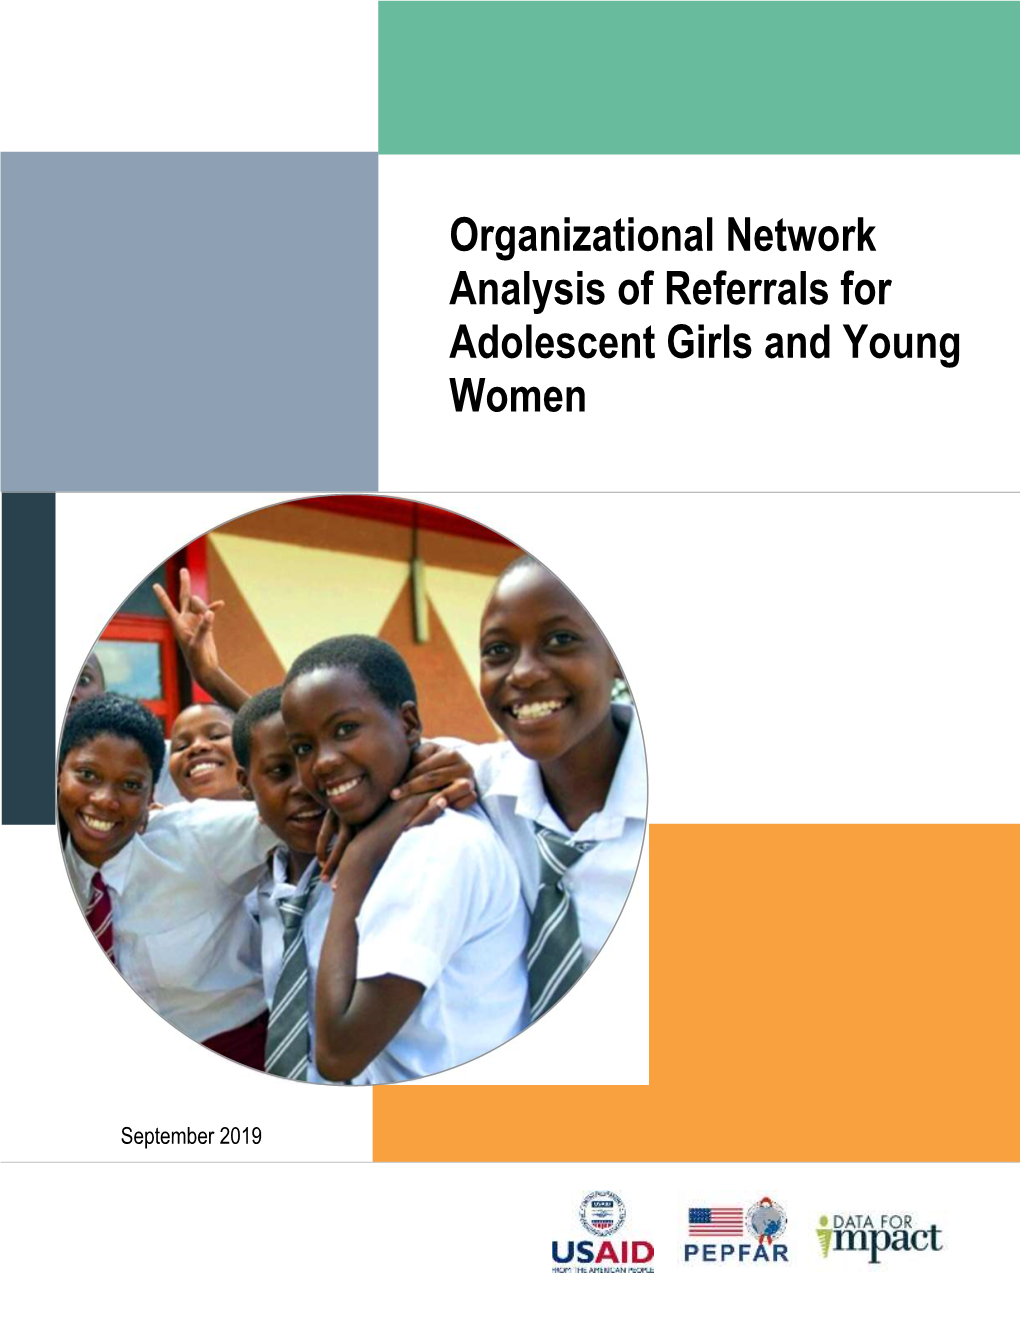 Organizational Network Analysis of Referrals for Adolescent Girls and Young Women